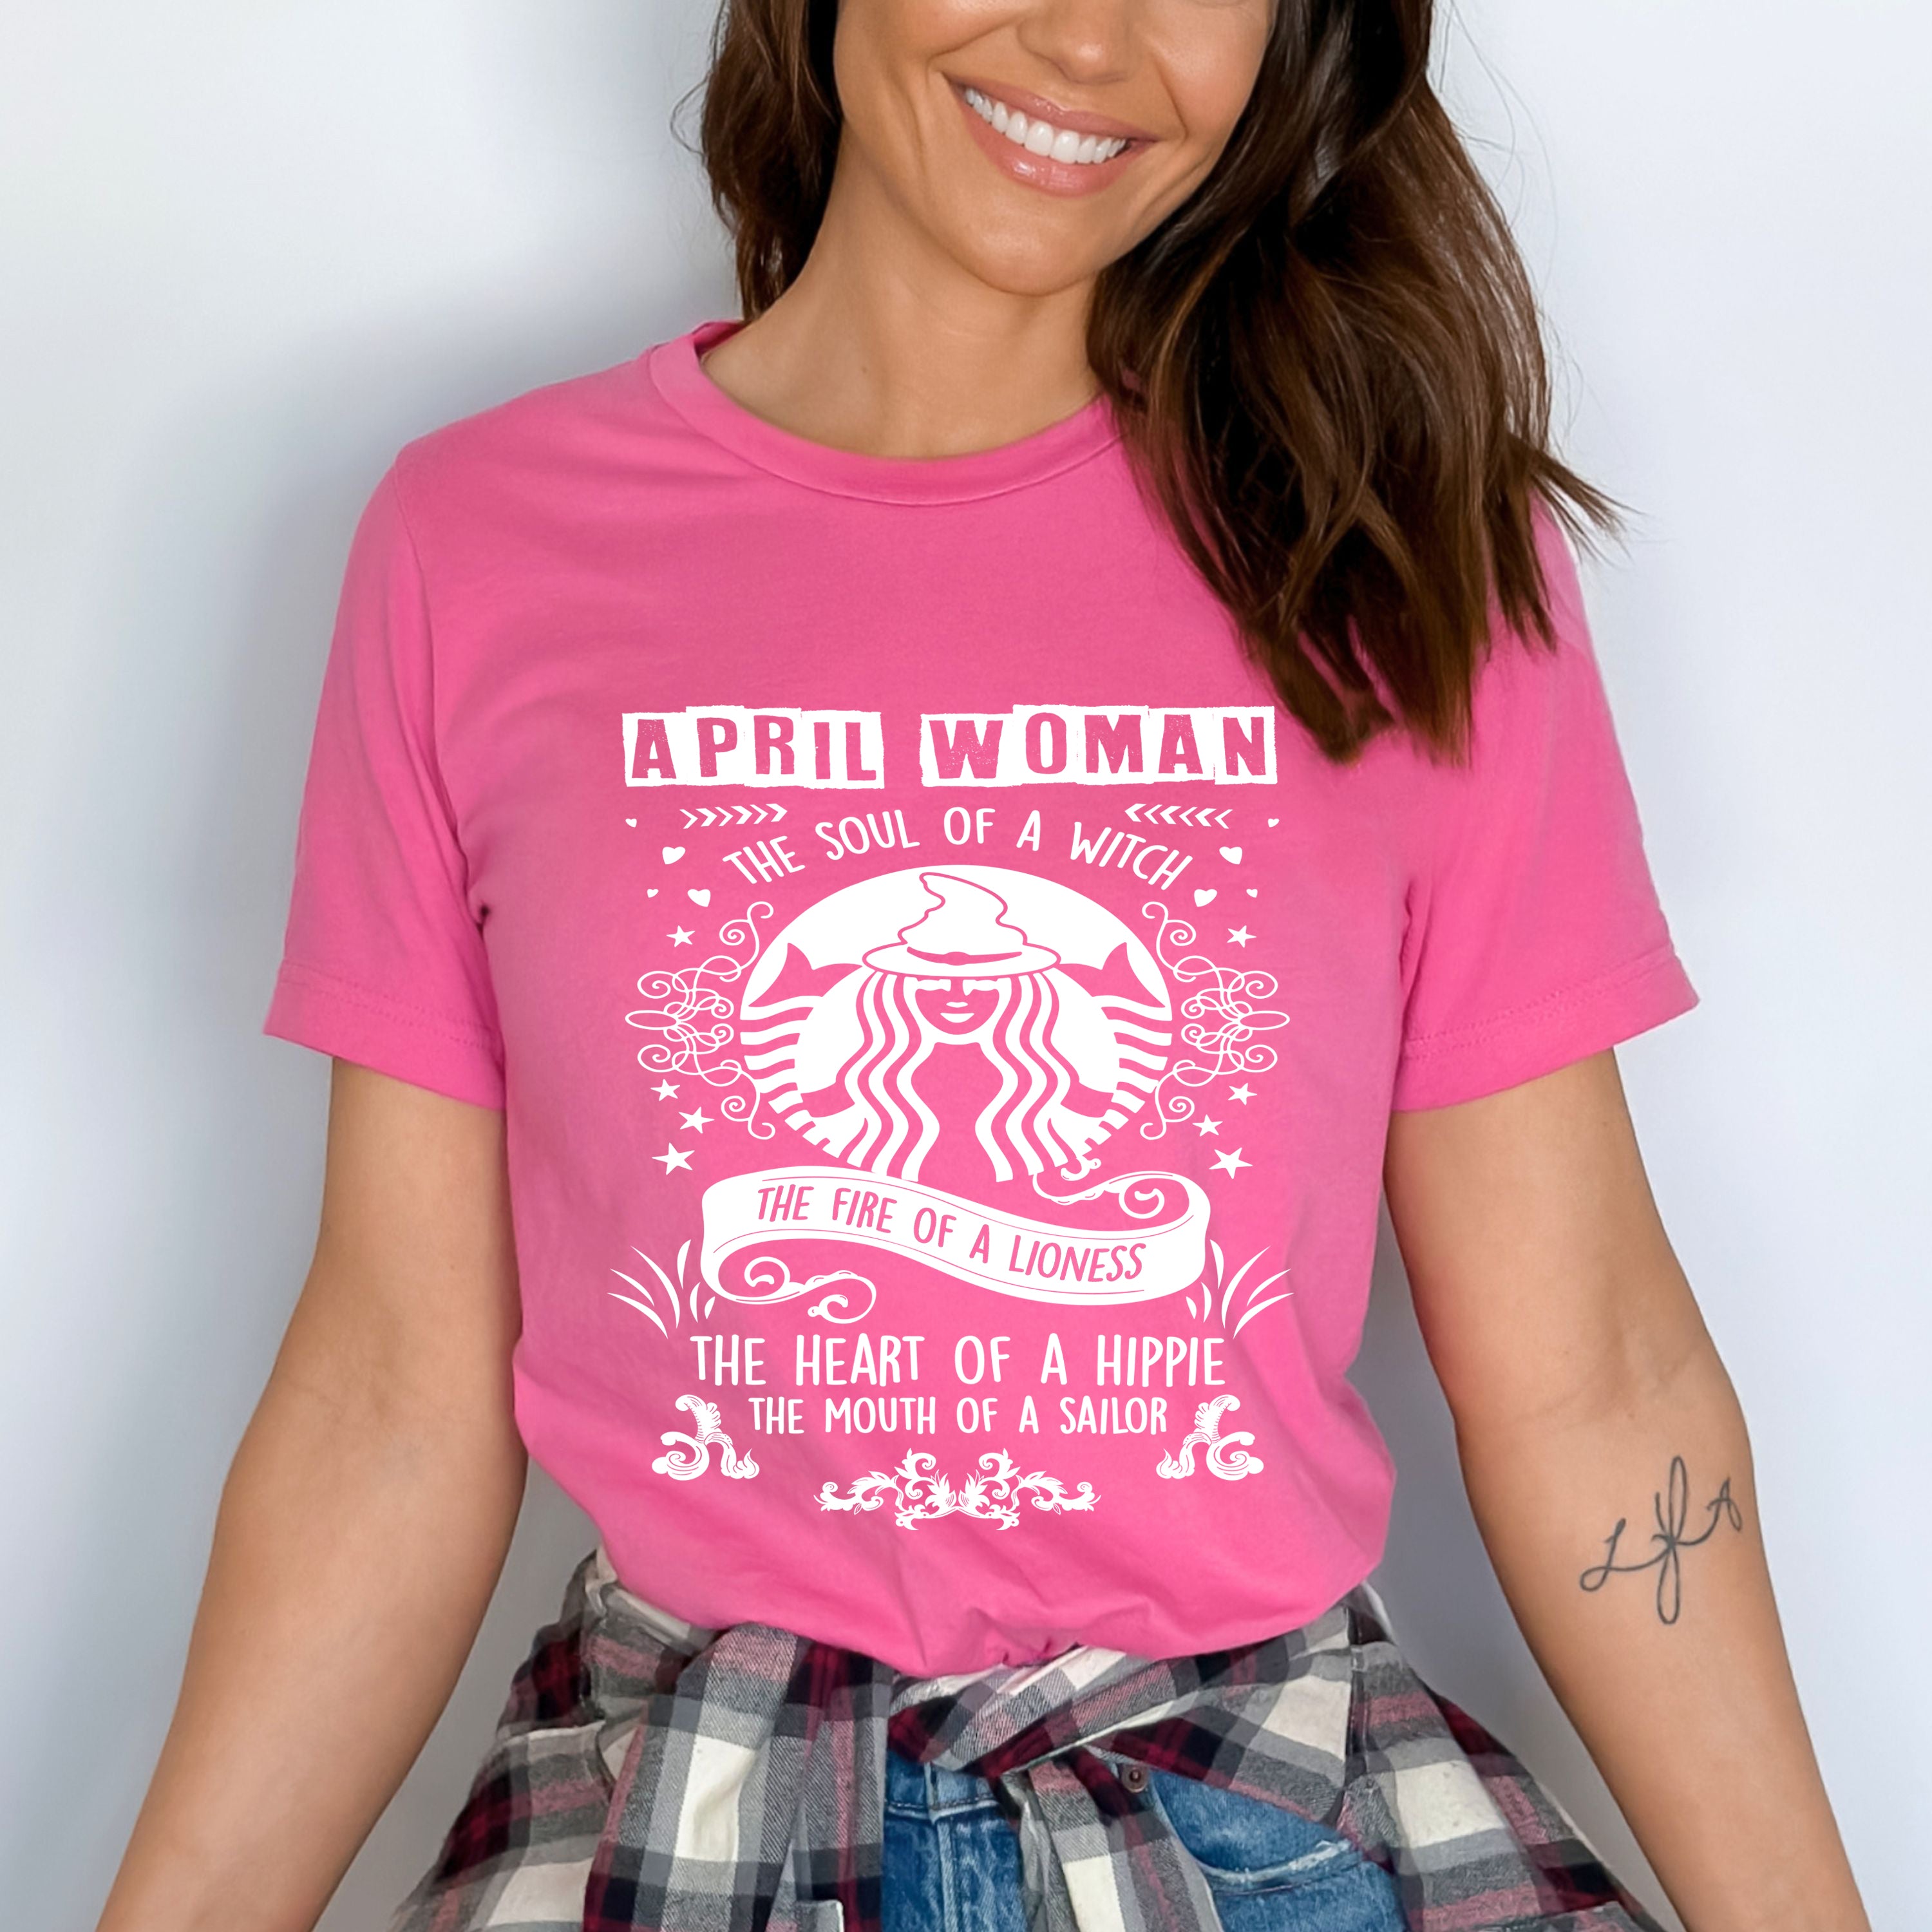 "APRIL WOMAN The Soul Of A Witch The Fire Of A Lioness The Heart Of A Hippie...",T-Shirt.